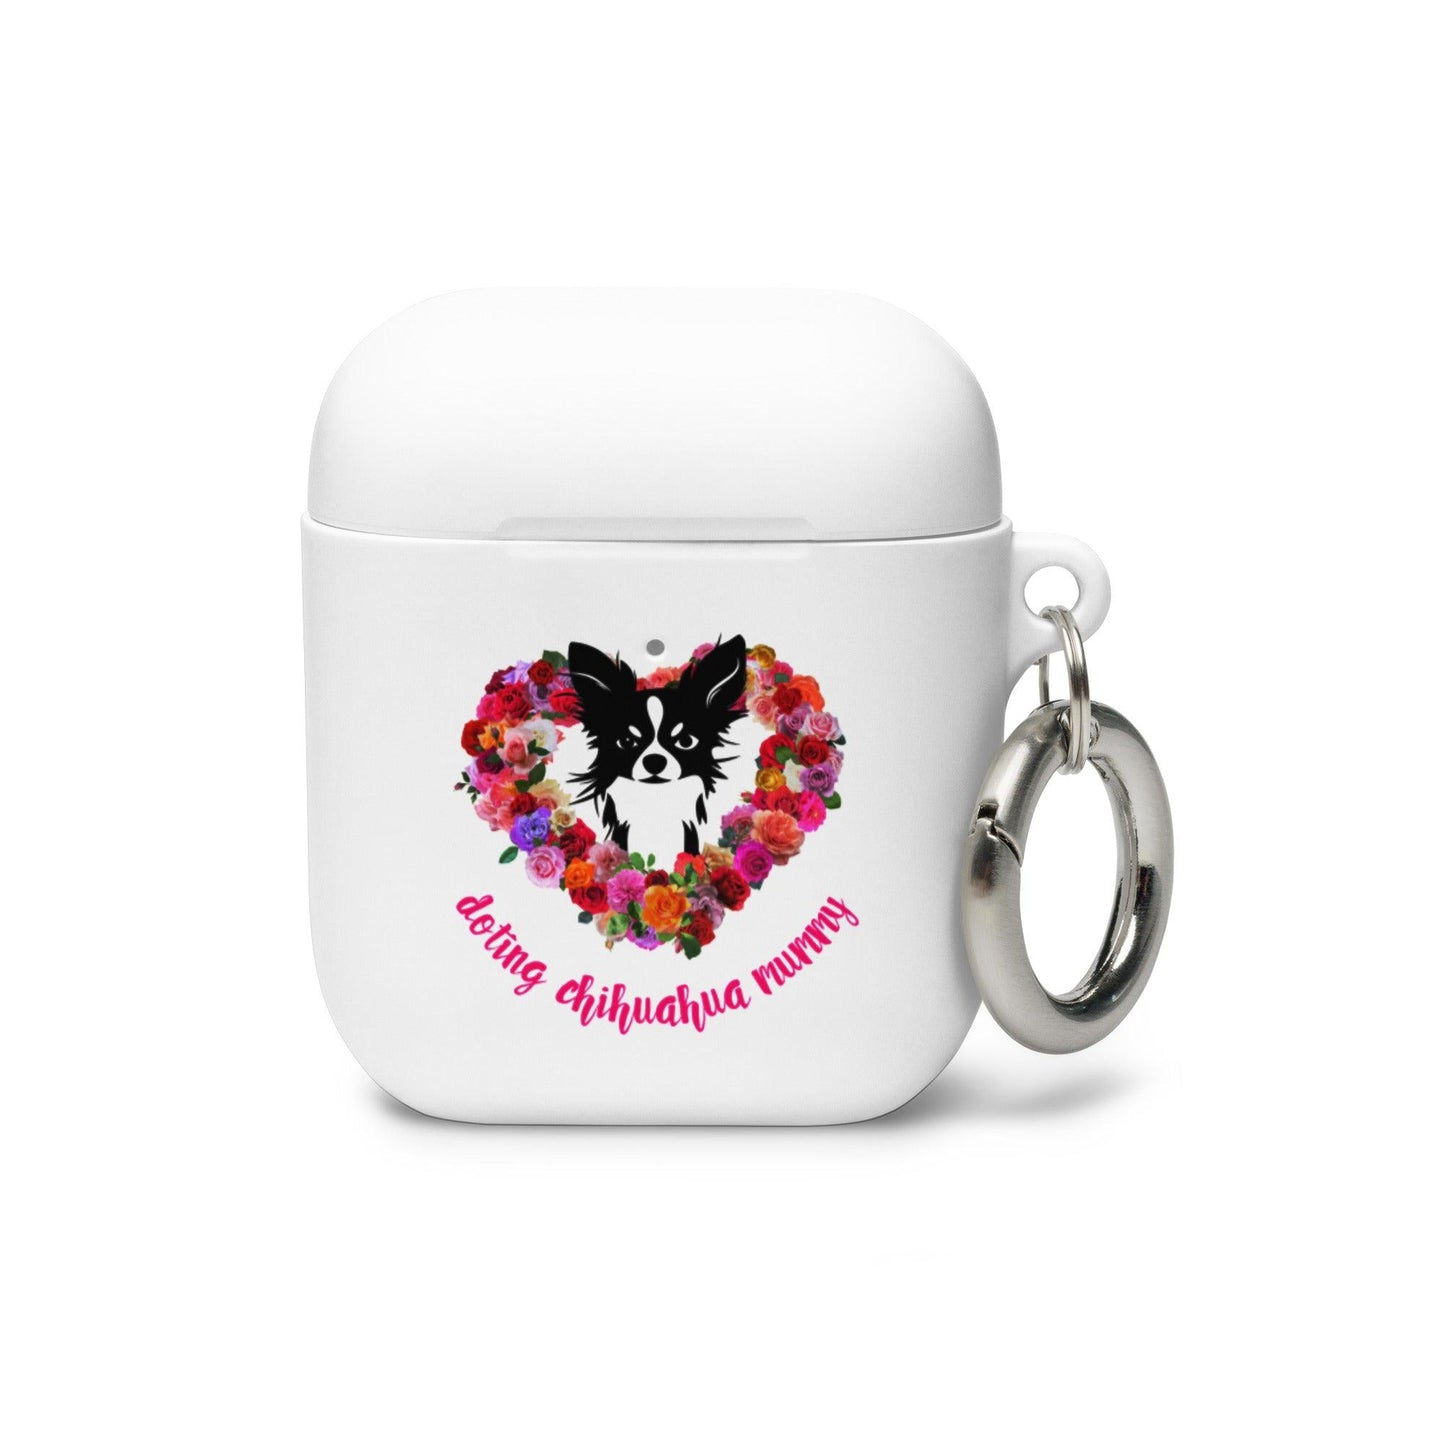 This adorable AirPods® / AirPods® Pro case features a black and white longhaired chihuahua surrounded by a heart-shaped rose garland, and the words "doting chihuahua mummy" - the perfect Mother's Day / birthday / Christmas gift for a chihuahua mum. "Aw" guaranteed! Robust rubber case made from impact-absorbing TPU to protect your earbuds. Works with both wireless and regular AirPod chargers. Includes round metal carabiner to attach to your bag, etc. Pink or White. Design by Renate Kriegler for Chimigos.